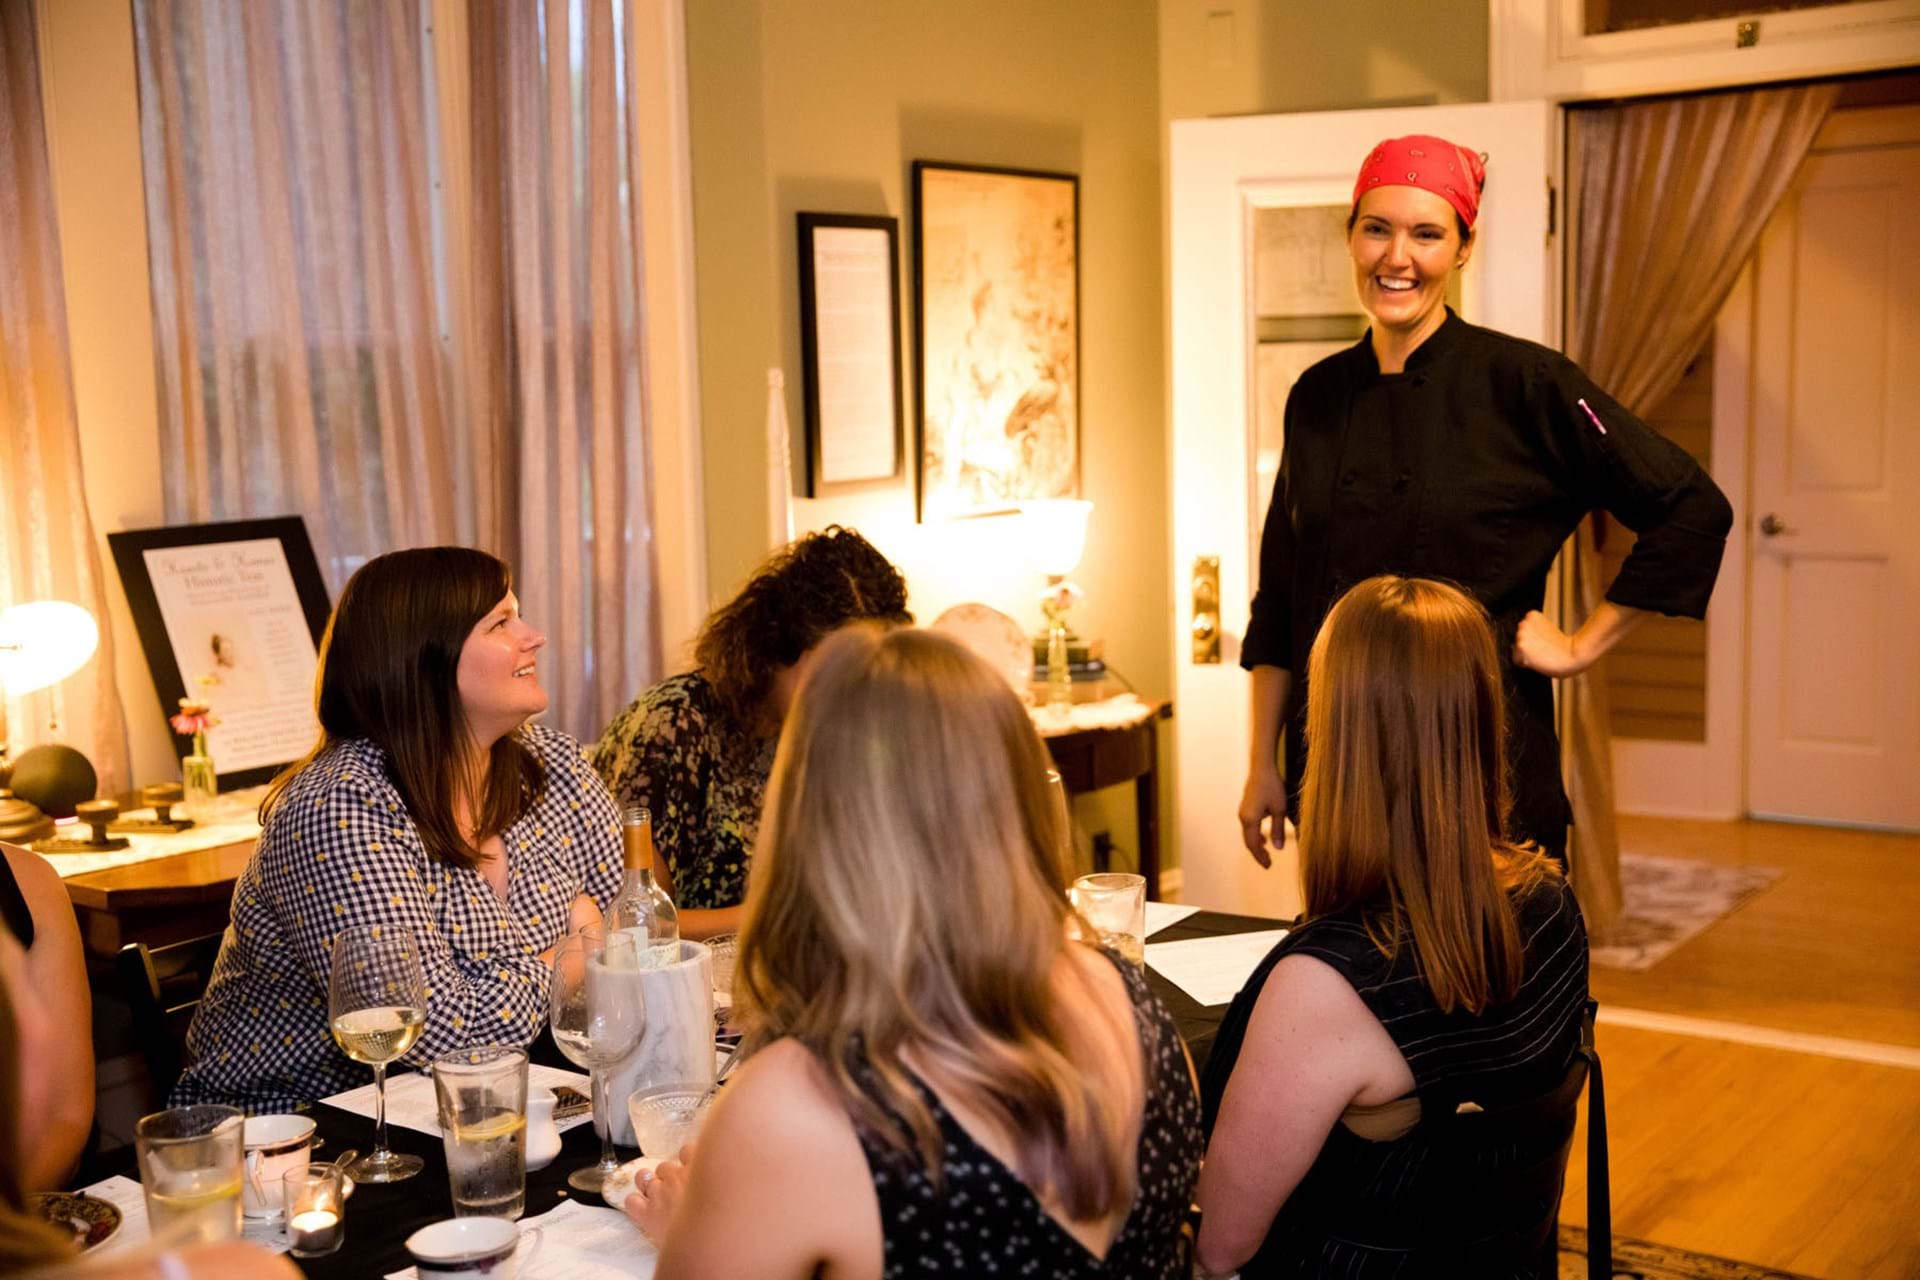 Chef Katie often personally visits with guests.